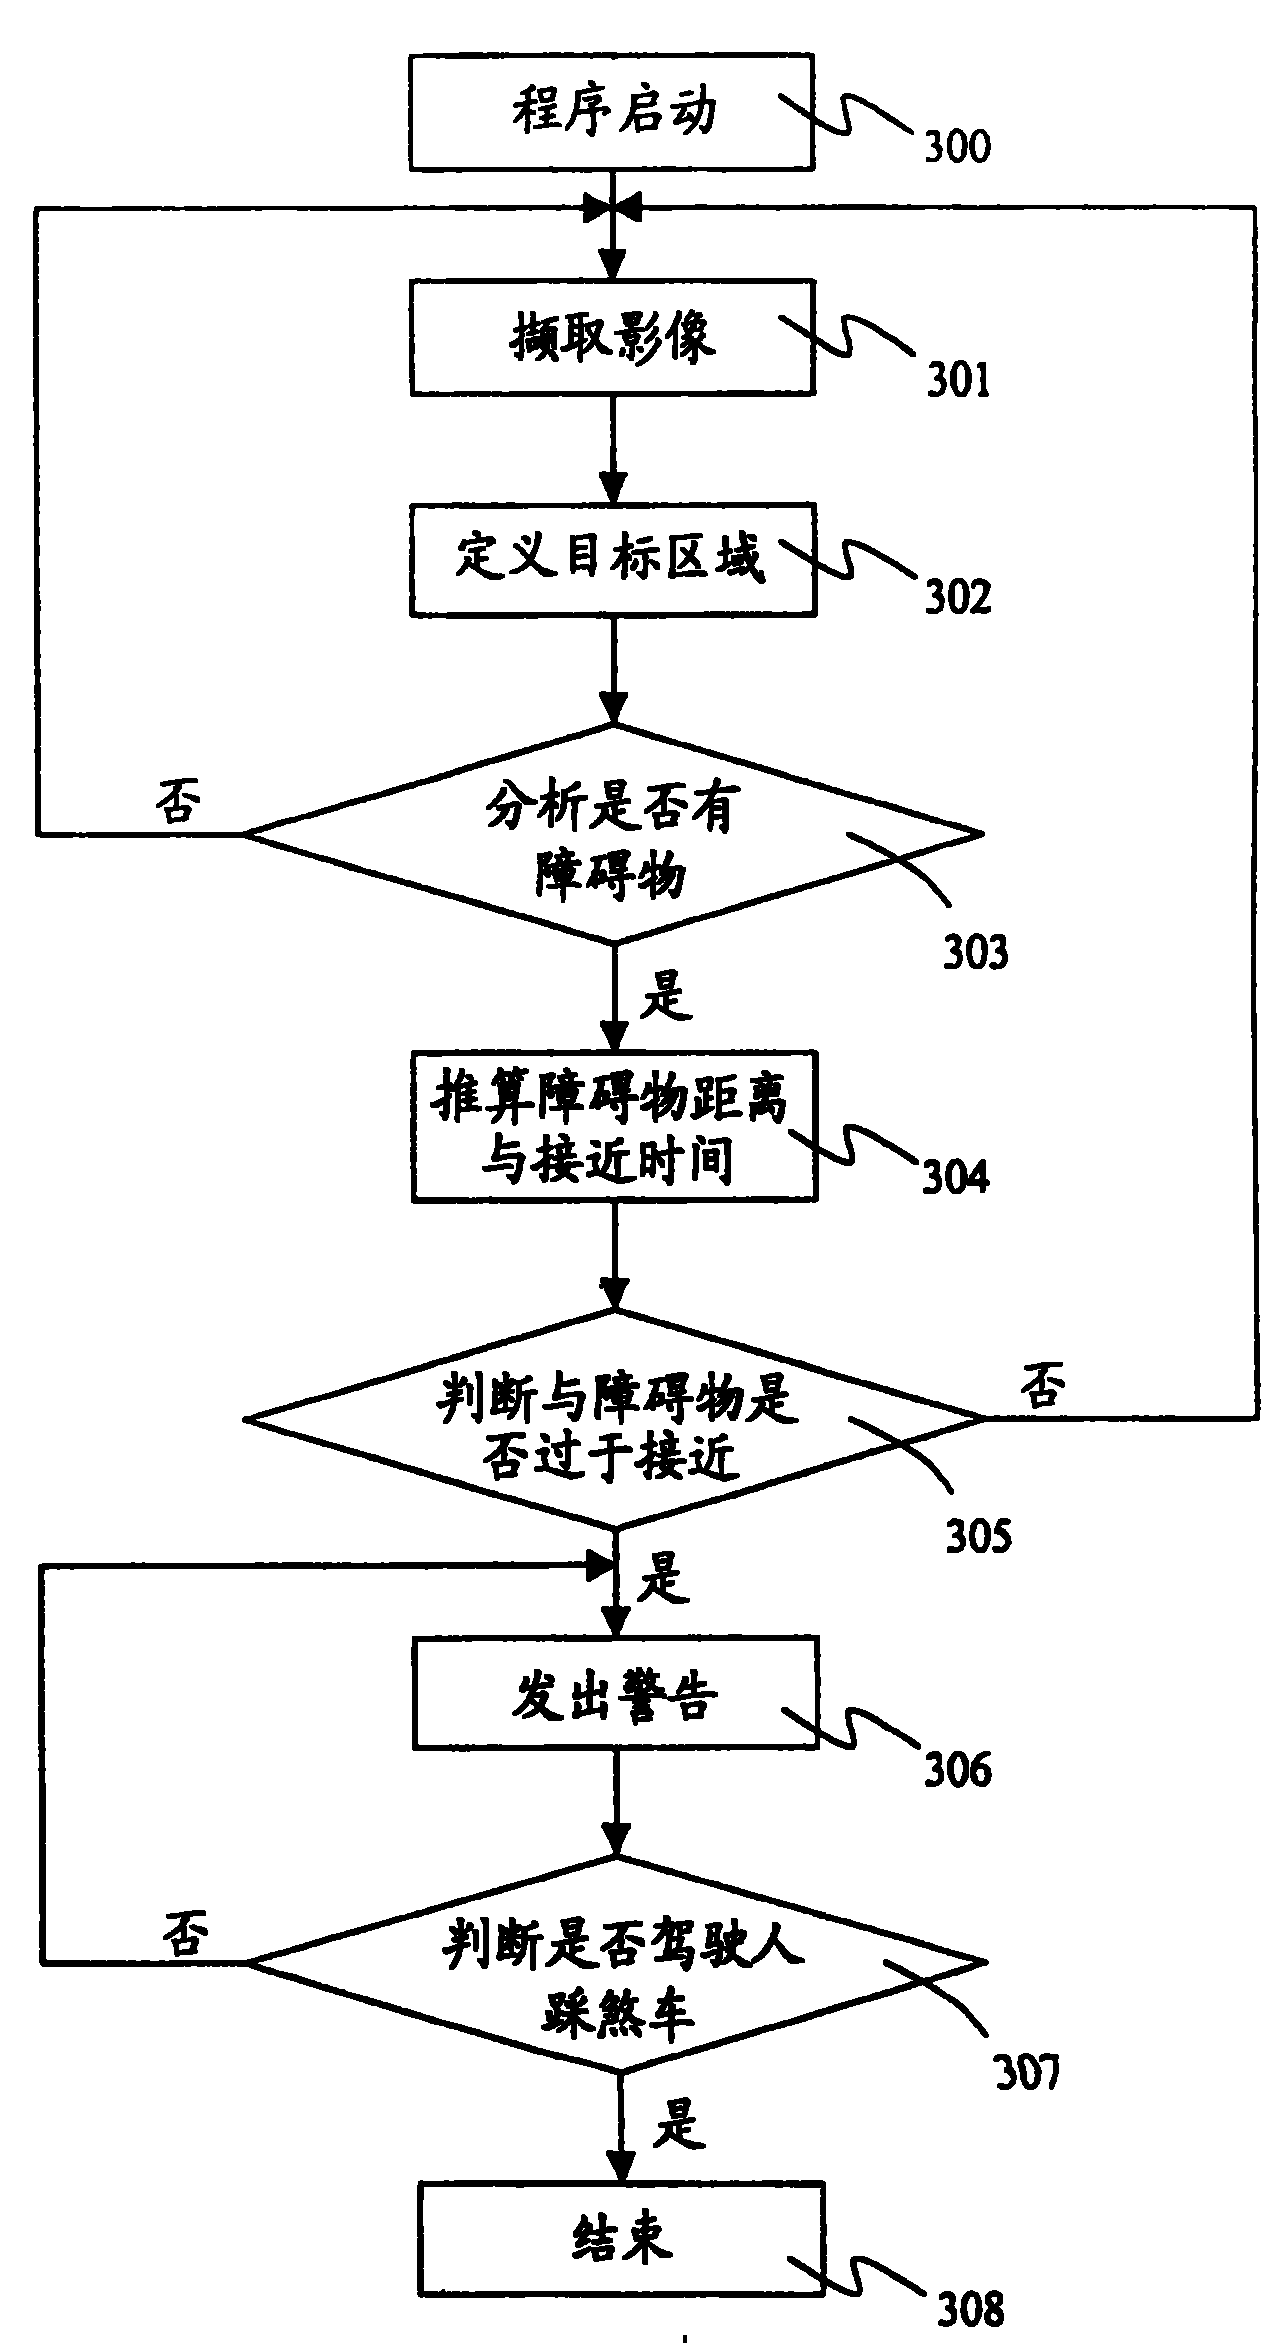 Method and apparatus for detecting vehicle distance